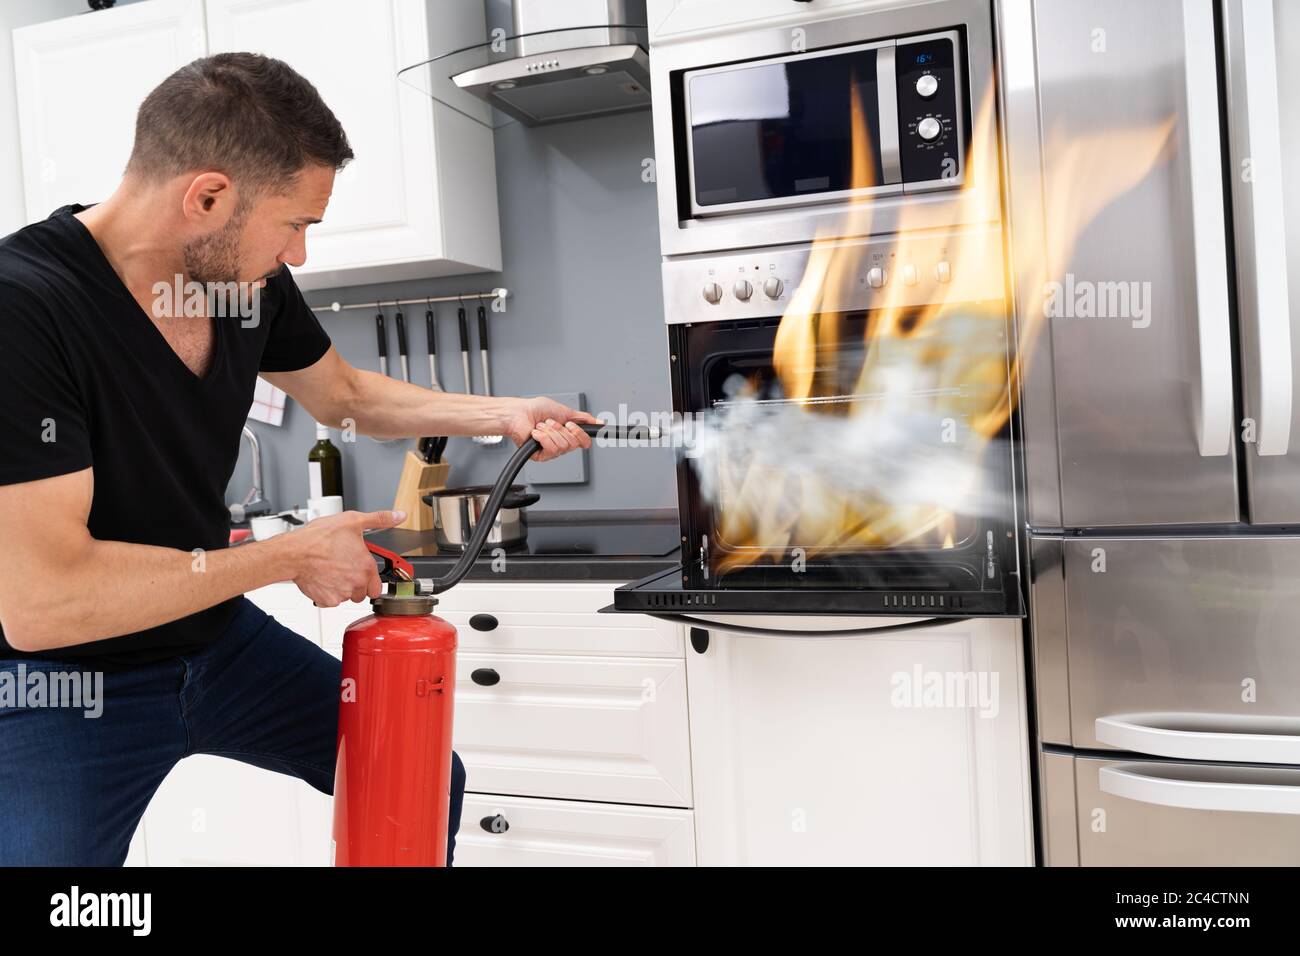 Man Using Fire Extinguisher To Put Out Fire From Oven At Home Stock Photo -  Alamy